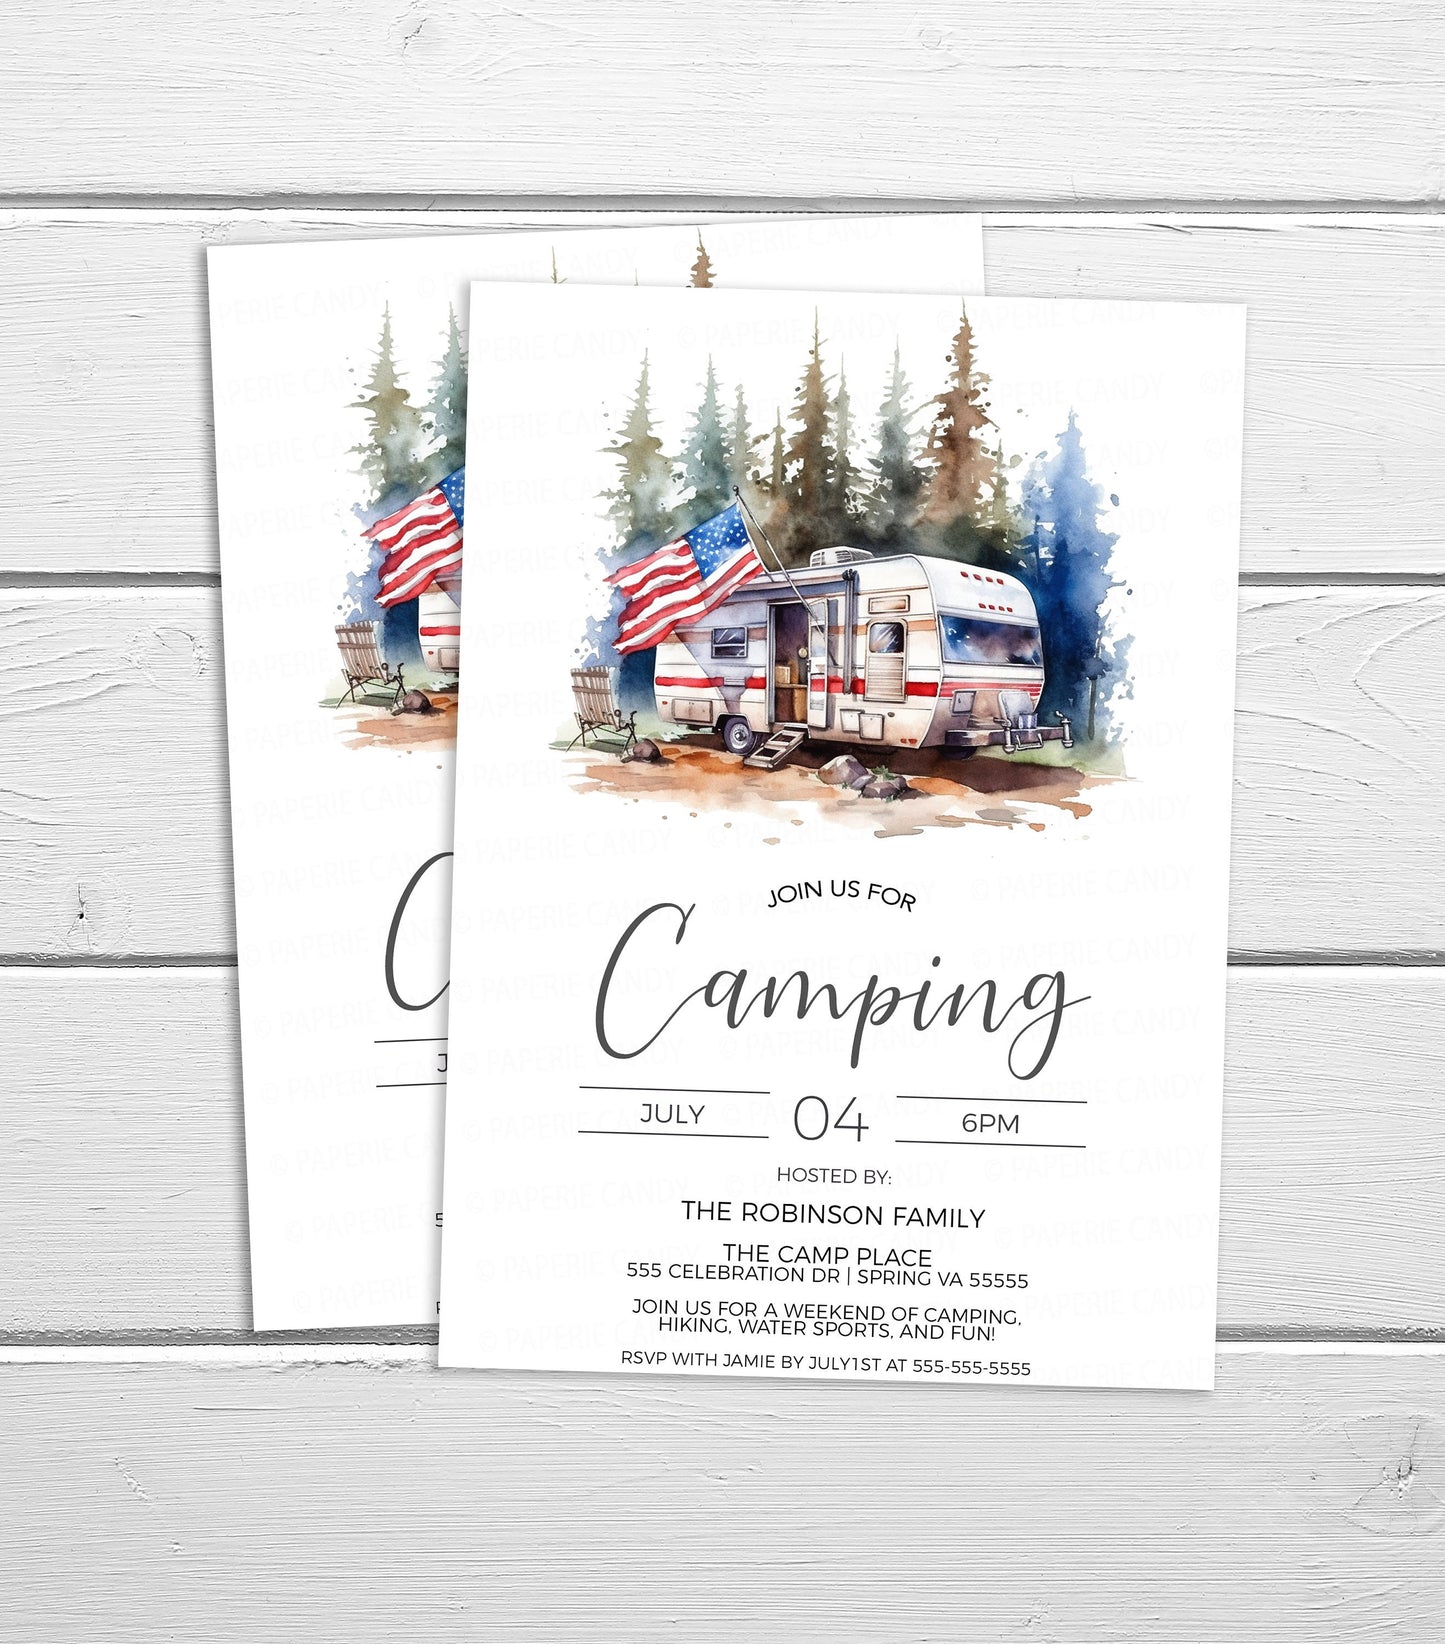 Patriotic Camping Invitation, RV Camping Party Invite, Independence Day, 4th of July, Labor Day, Memorial Day, Editable Printable Template